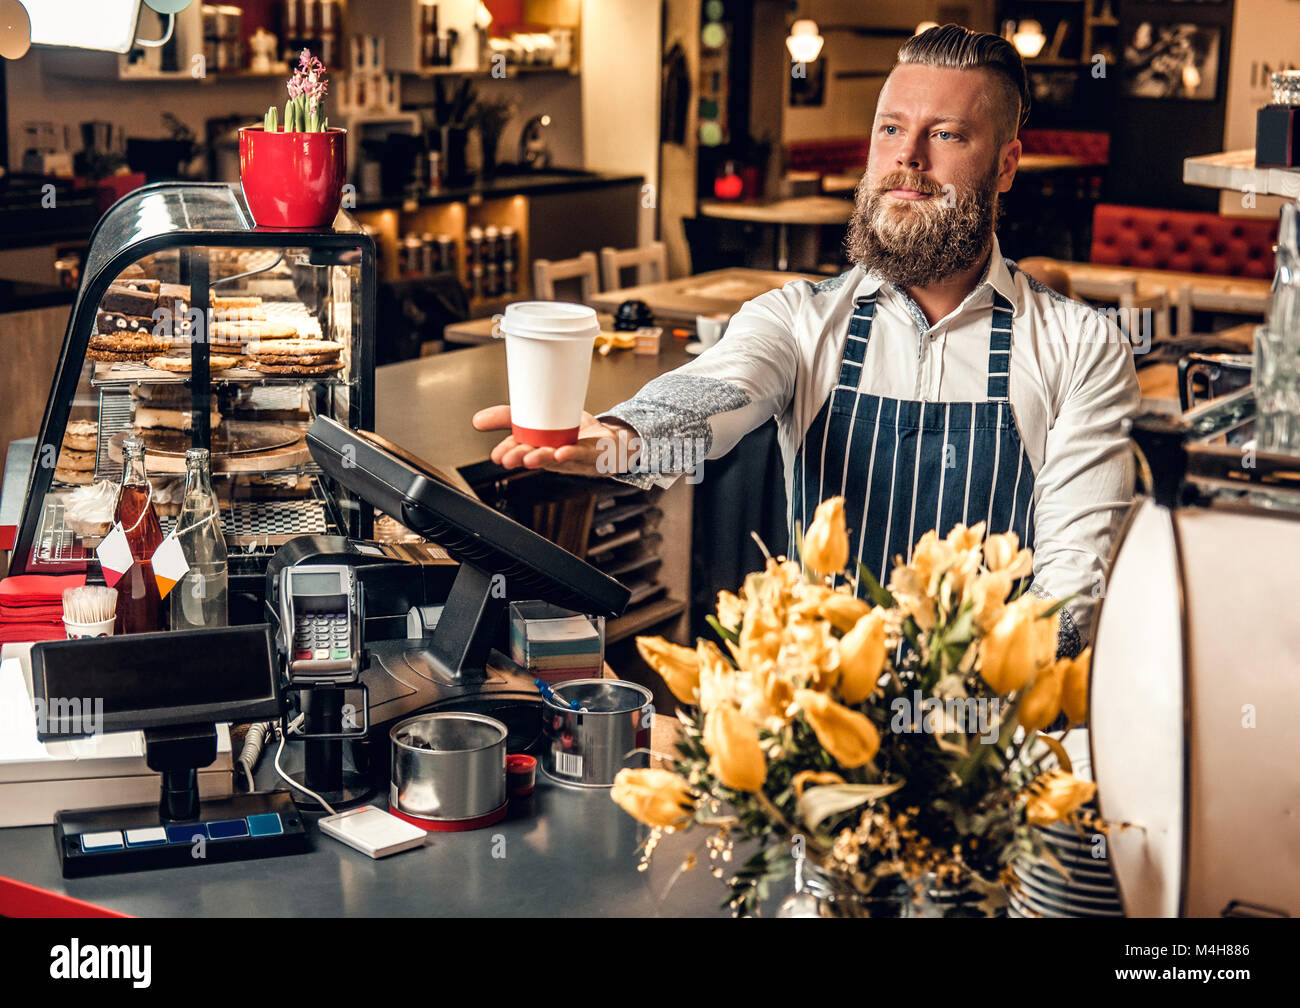 https://c8.alamy.com/comp/M4H886/positive-bearded-barista-male-selling-coffee-to-a-consumer-in-a-coffee-M4H886.jpg